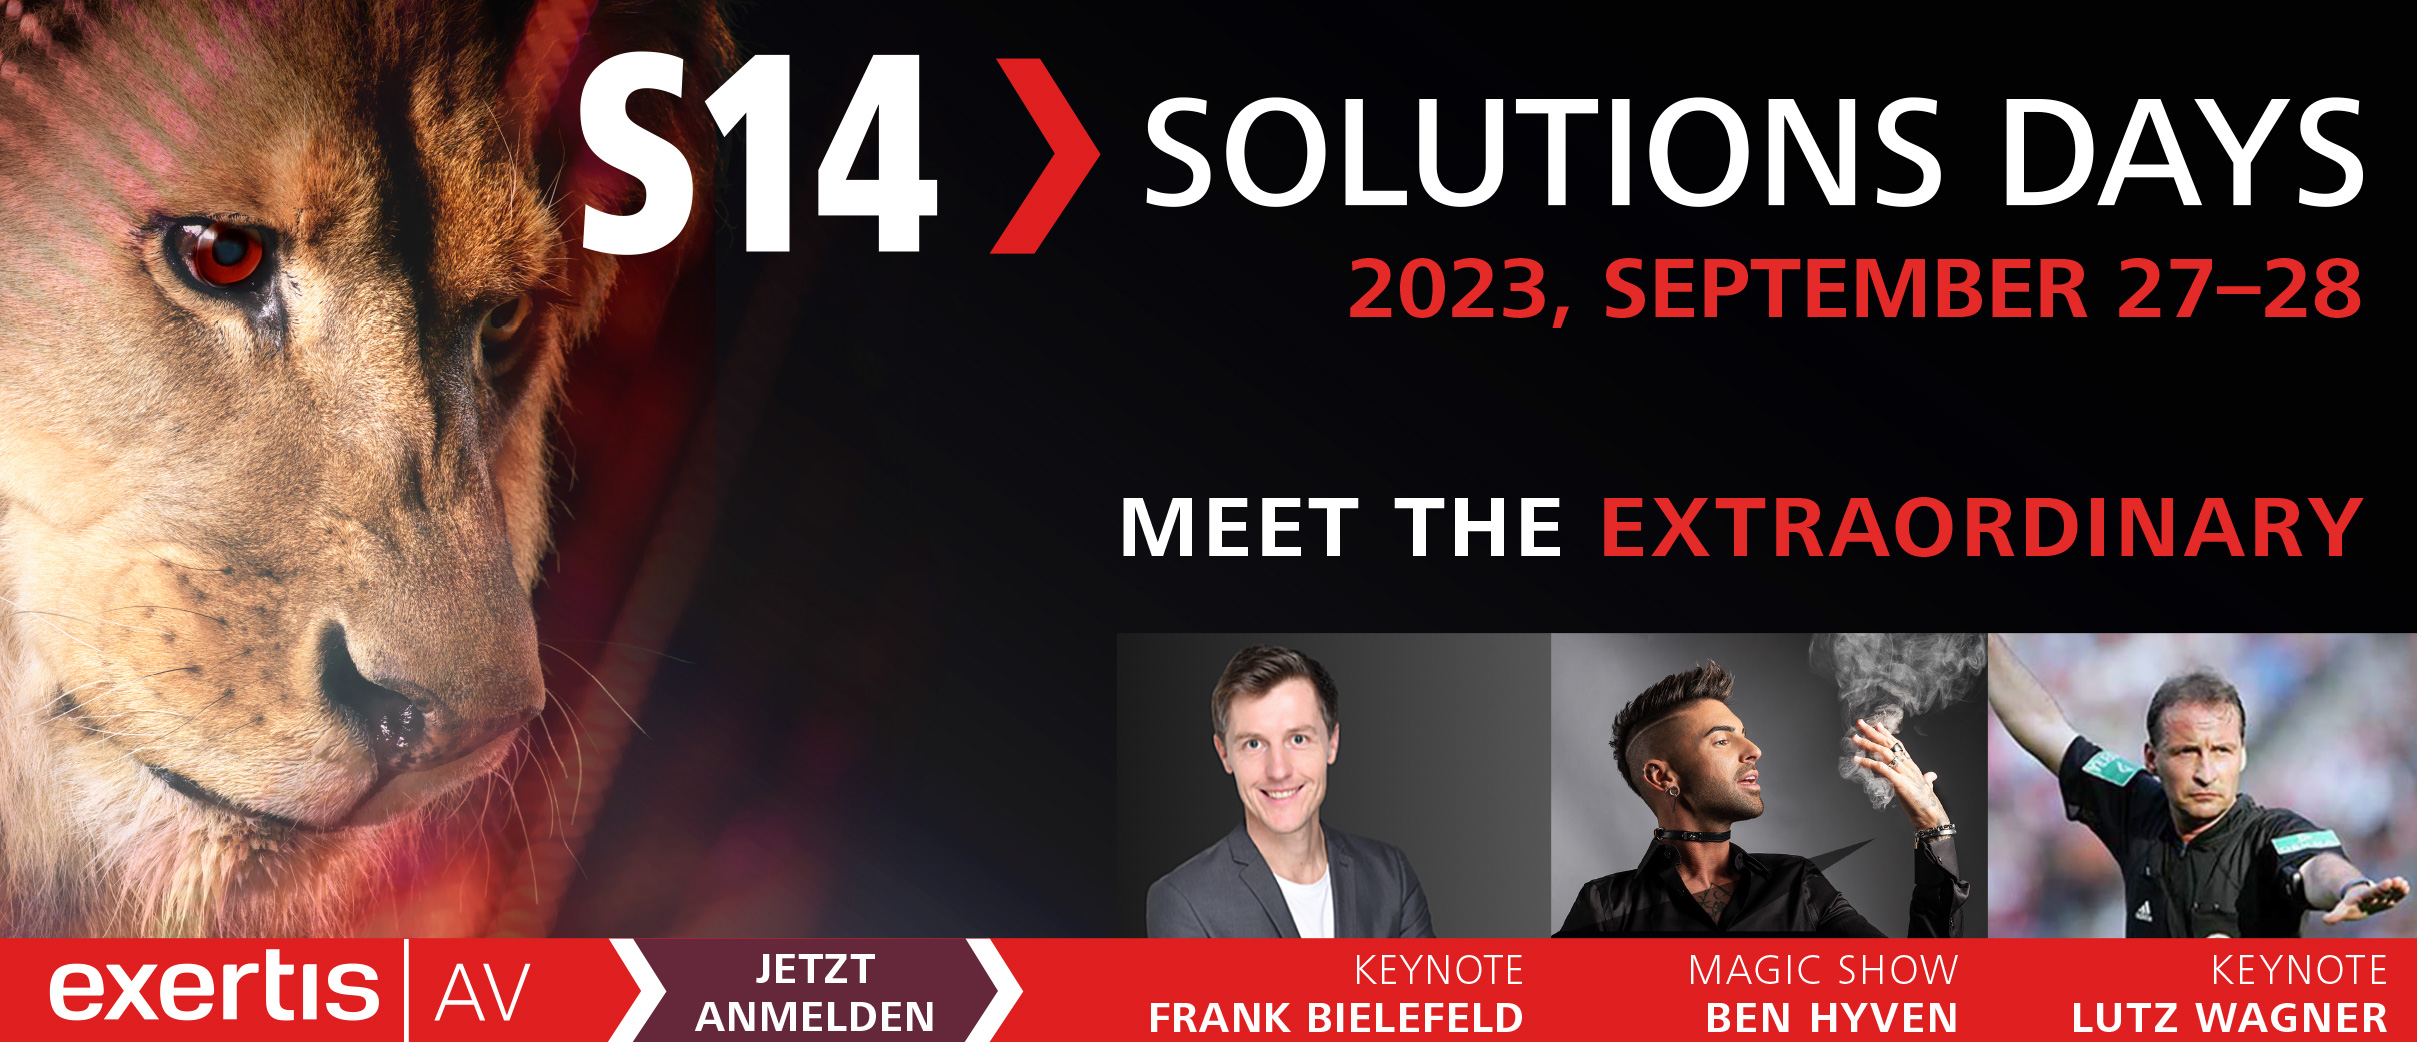 Meet the extraordinary! The S14 Solutions Days of Exertis AV on 27. and 28.09.2023